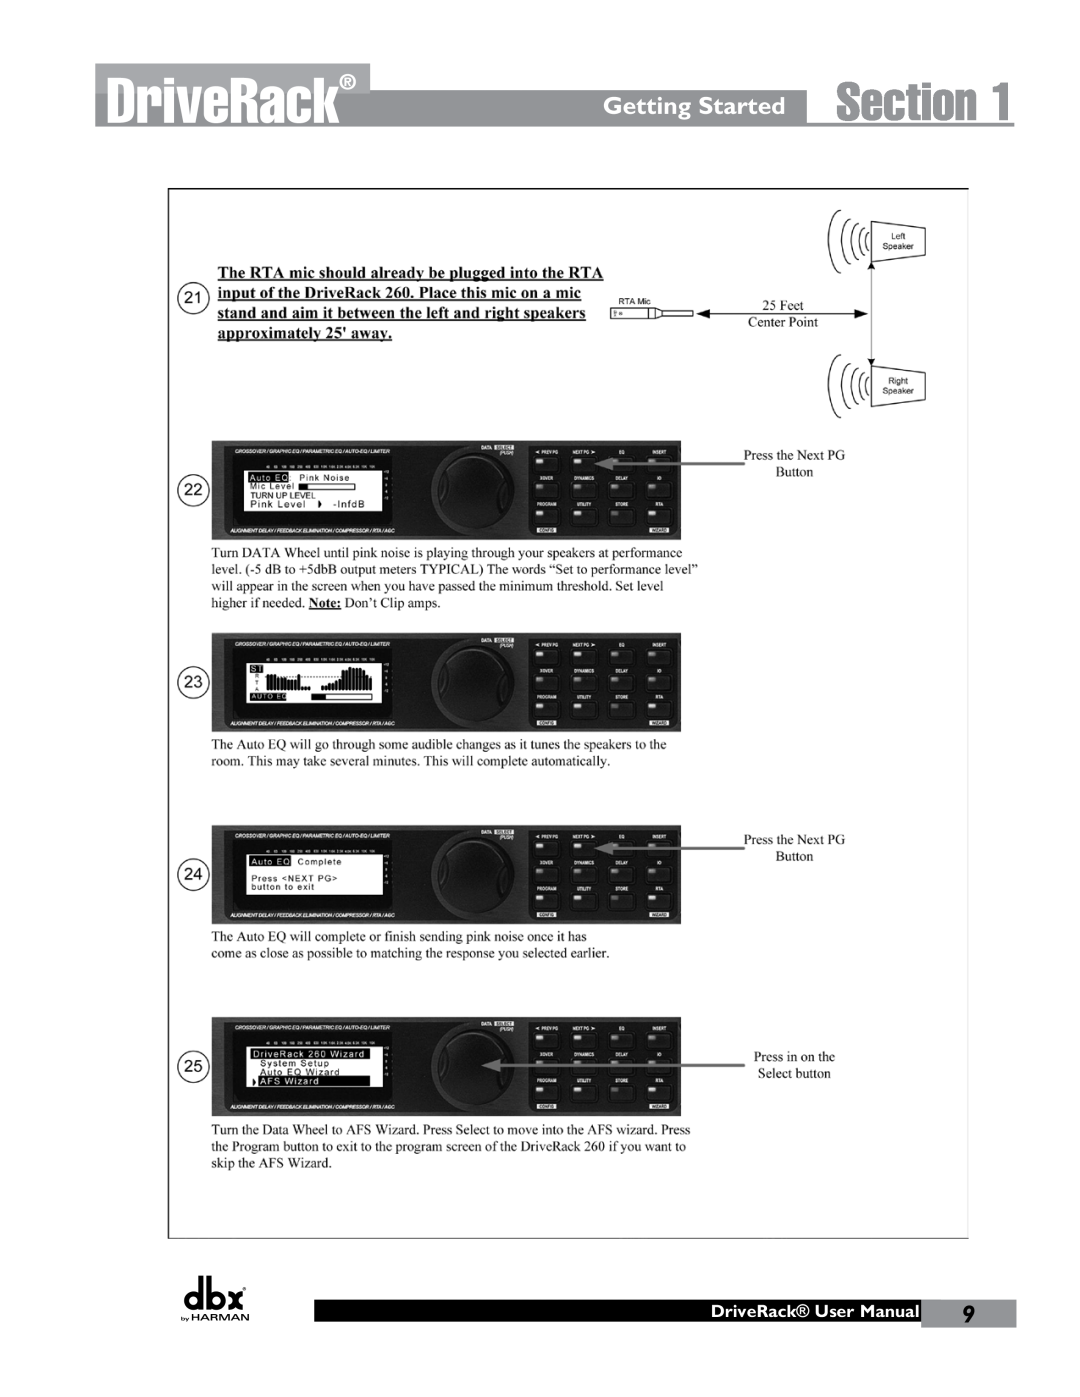 JBL 260 user manual DriveRack, Section, Getting Started 